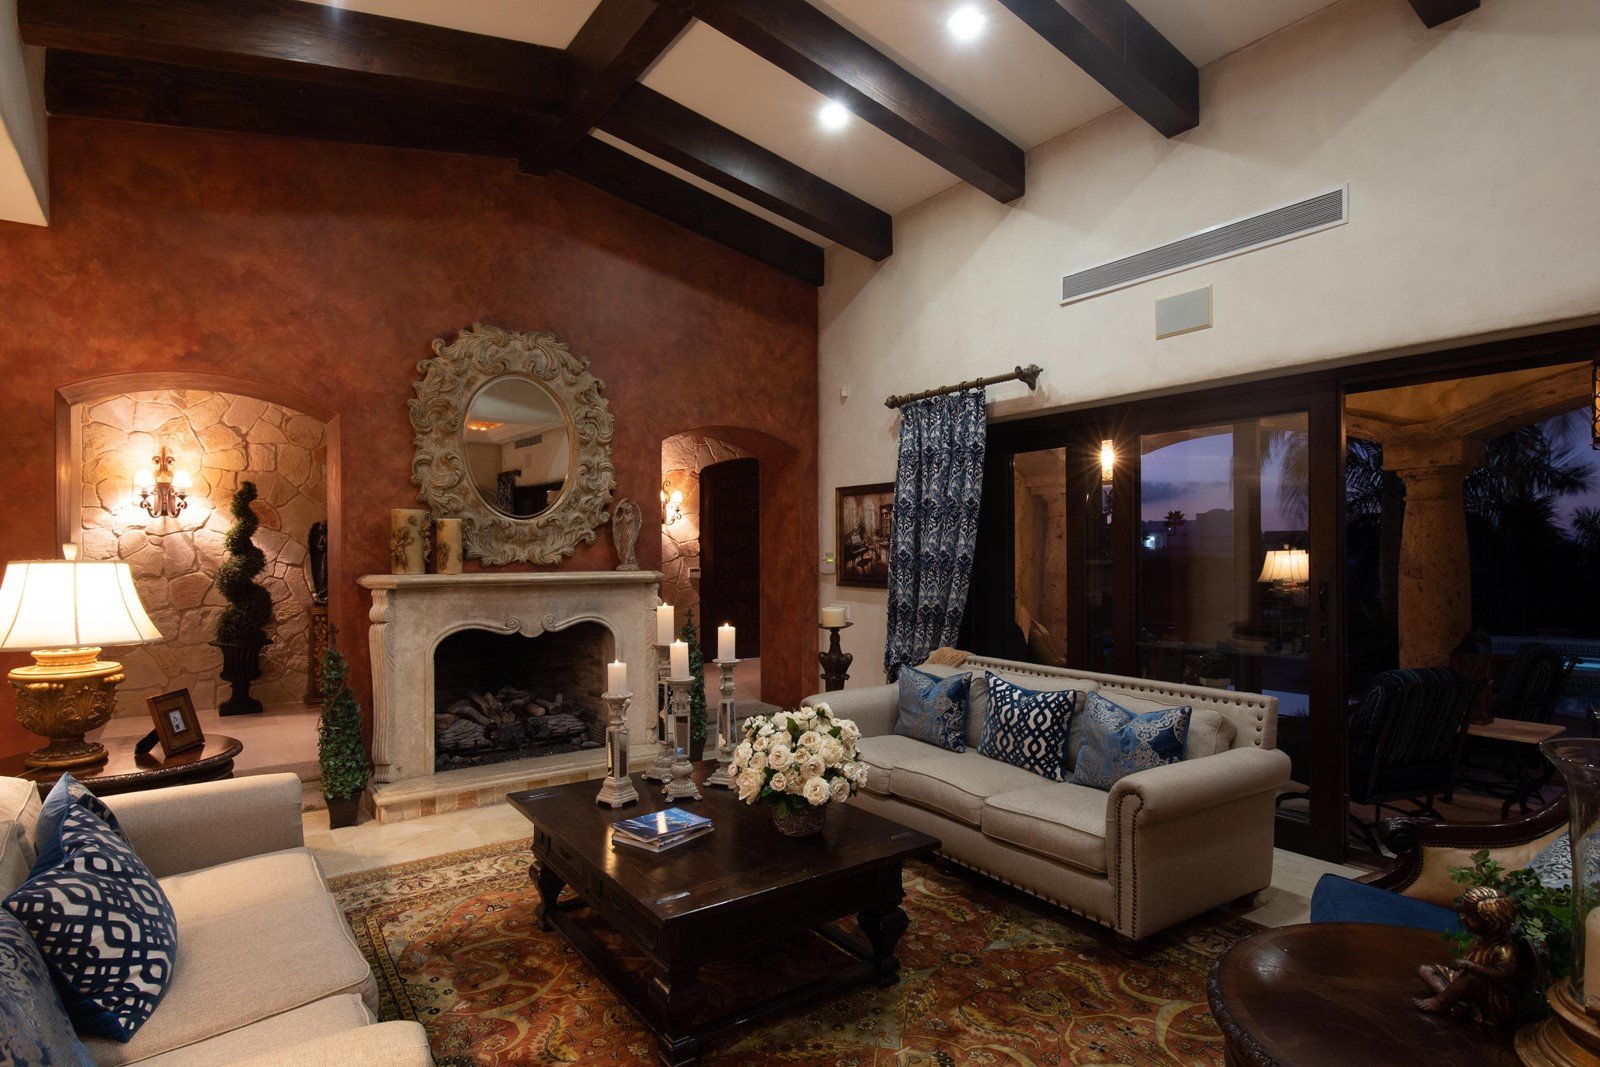 A cozy seating area with two couches next to a fireplace in the villa.